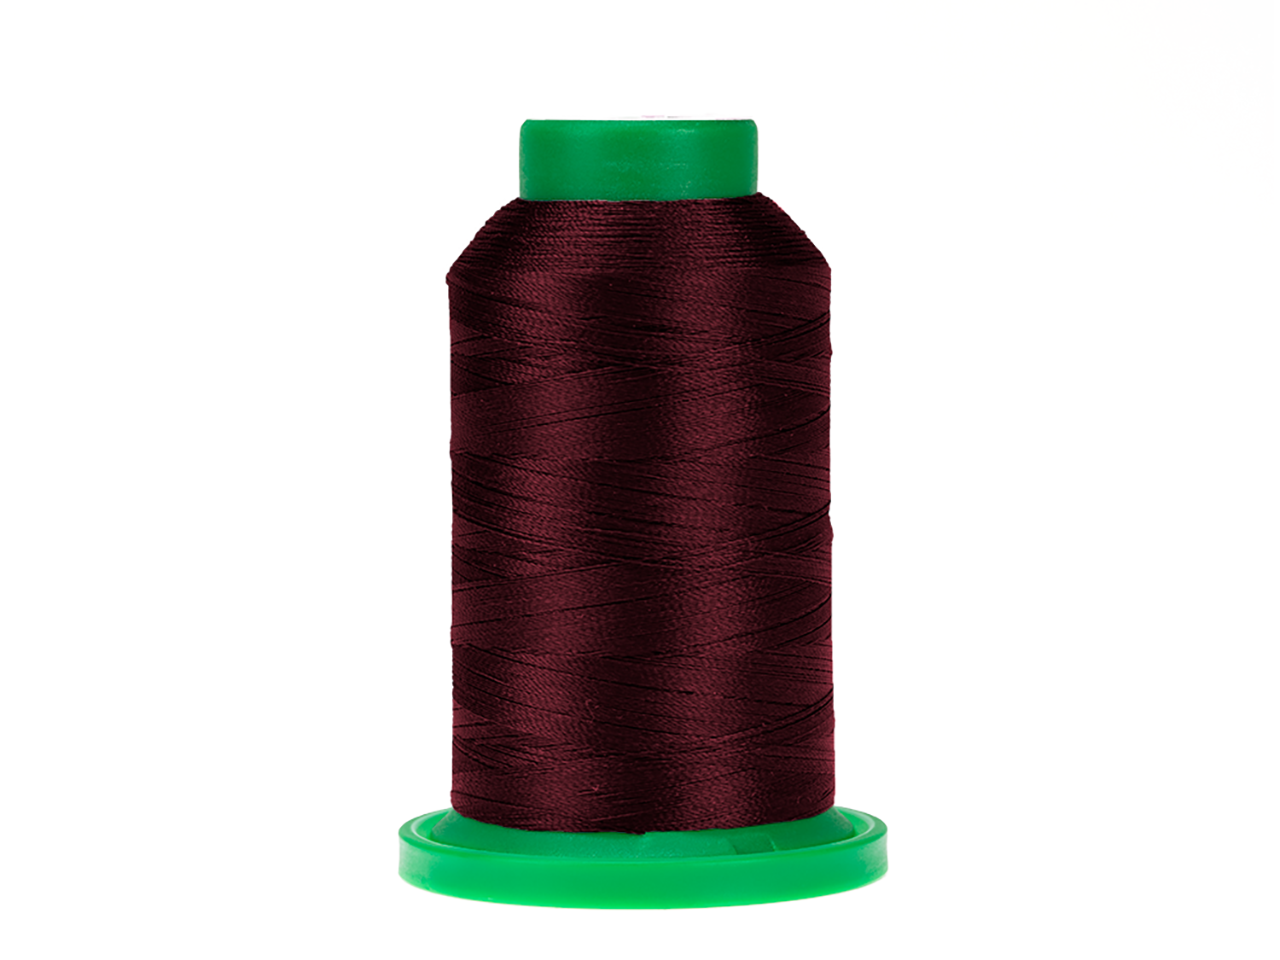 Isacord - A2115 - Beet Red - 5000m